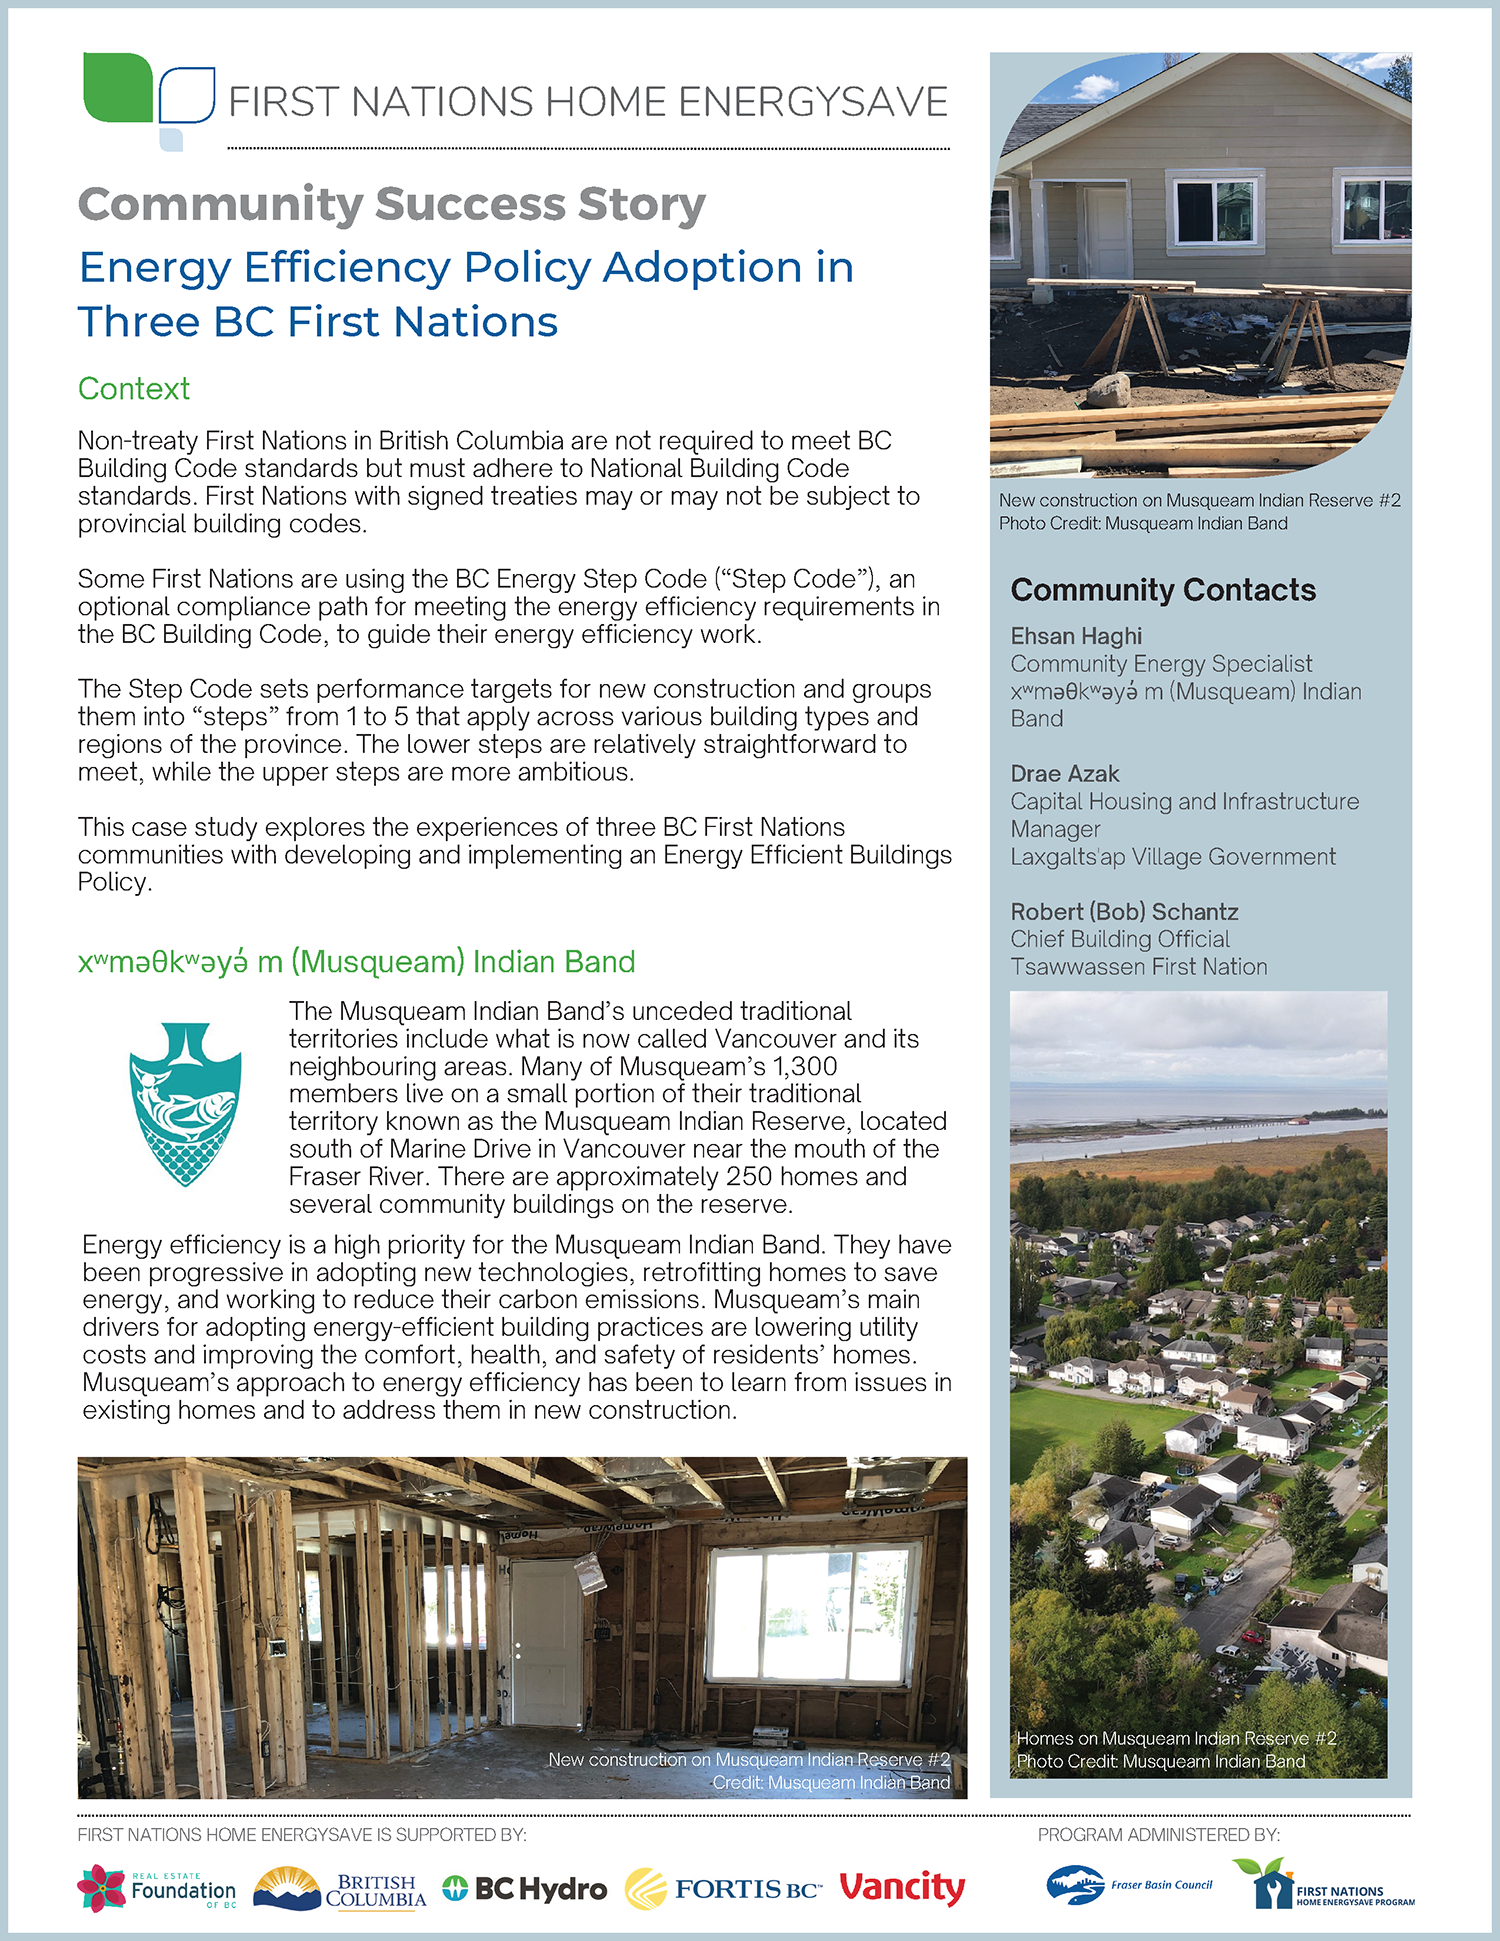 Energy Efficiency Policies in First Nations Communities